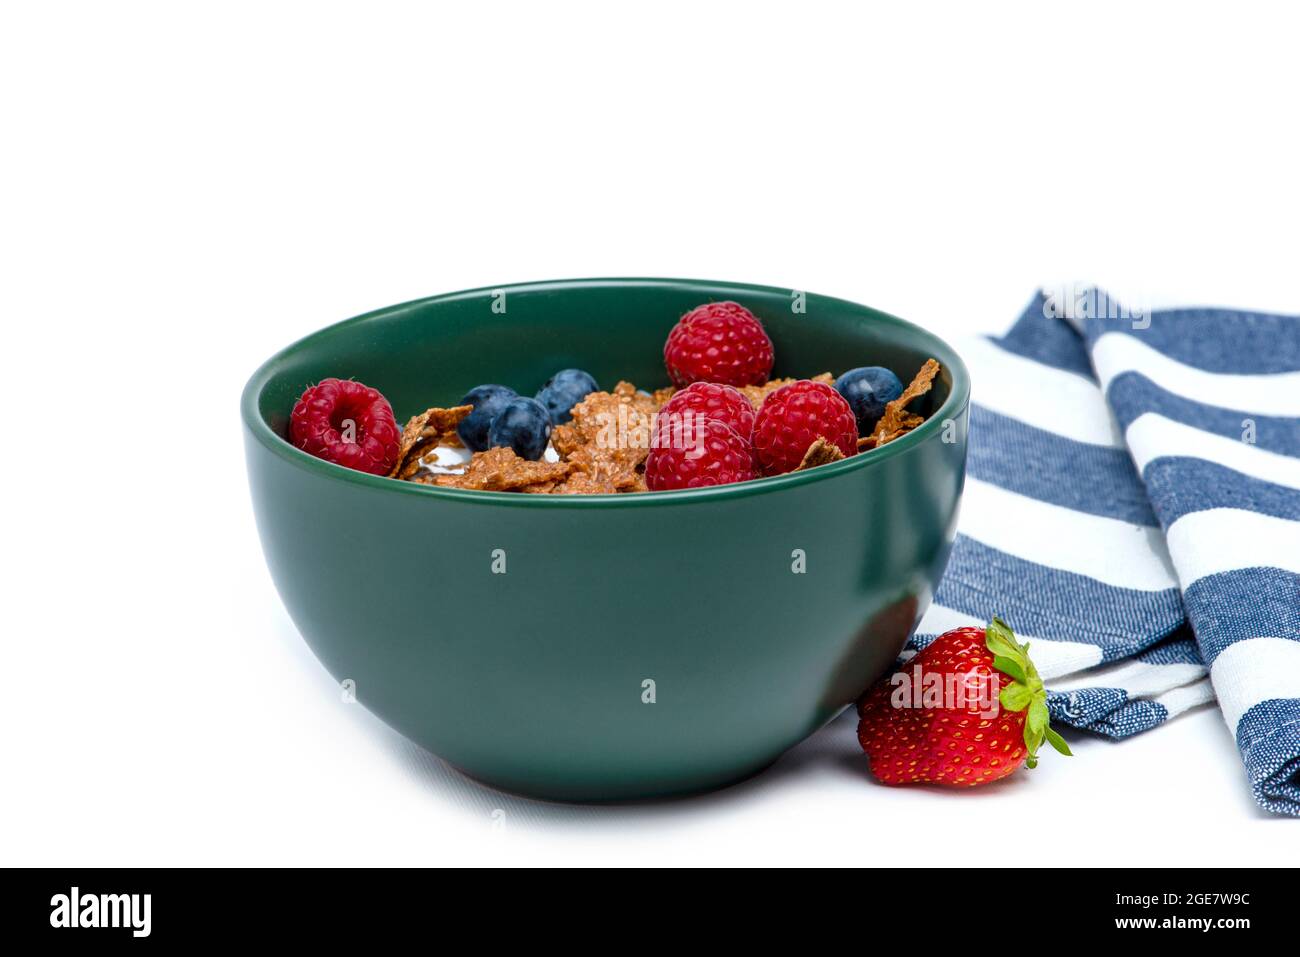 Muesli, isolate on white. Breakfast, healthy food and diet. Muesli with fruits and milk in a plate. Blueberries, strawberries and raspberries on a Stock Photo